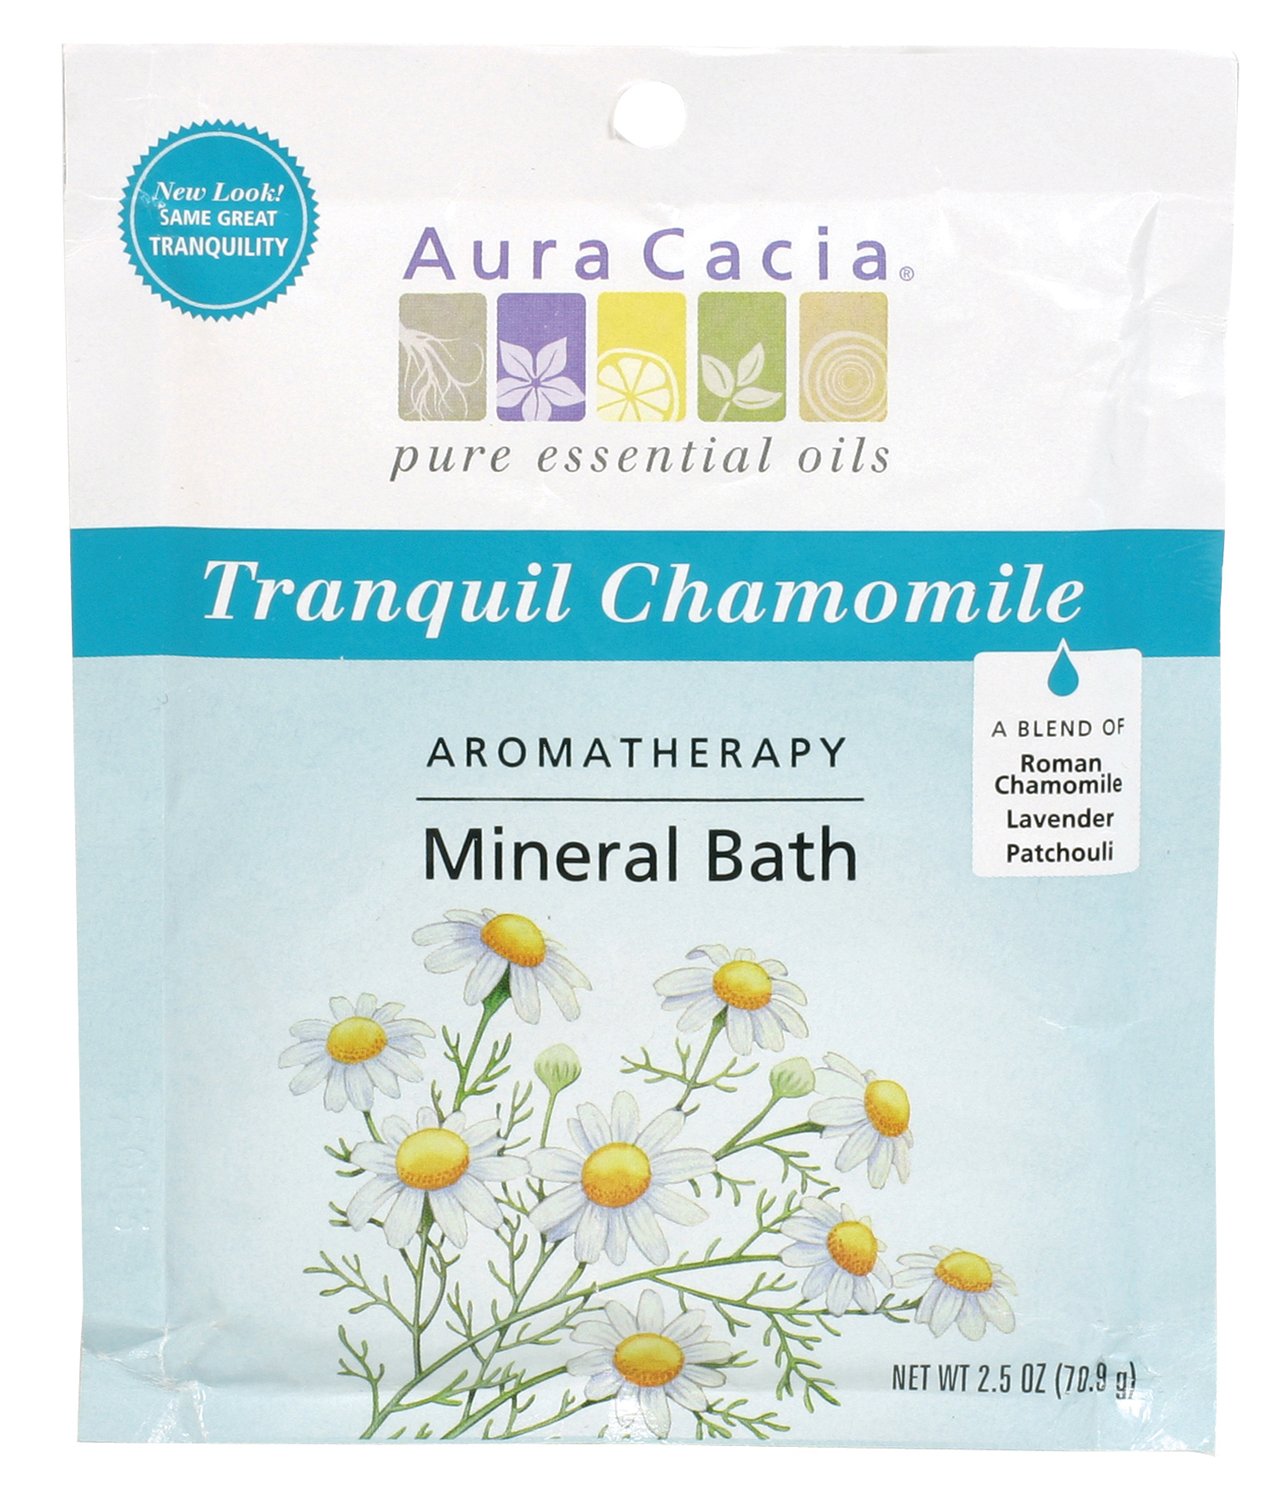 Aura Cacia Aromatherapy Mineral Bath, Tranquil Chamomile, 2.5 ounce packet (Pack of 3)